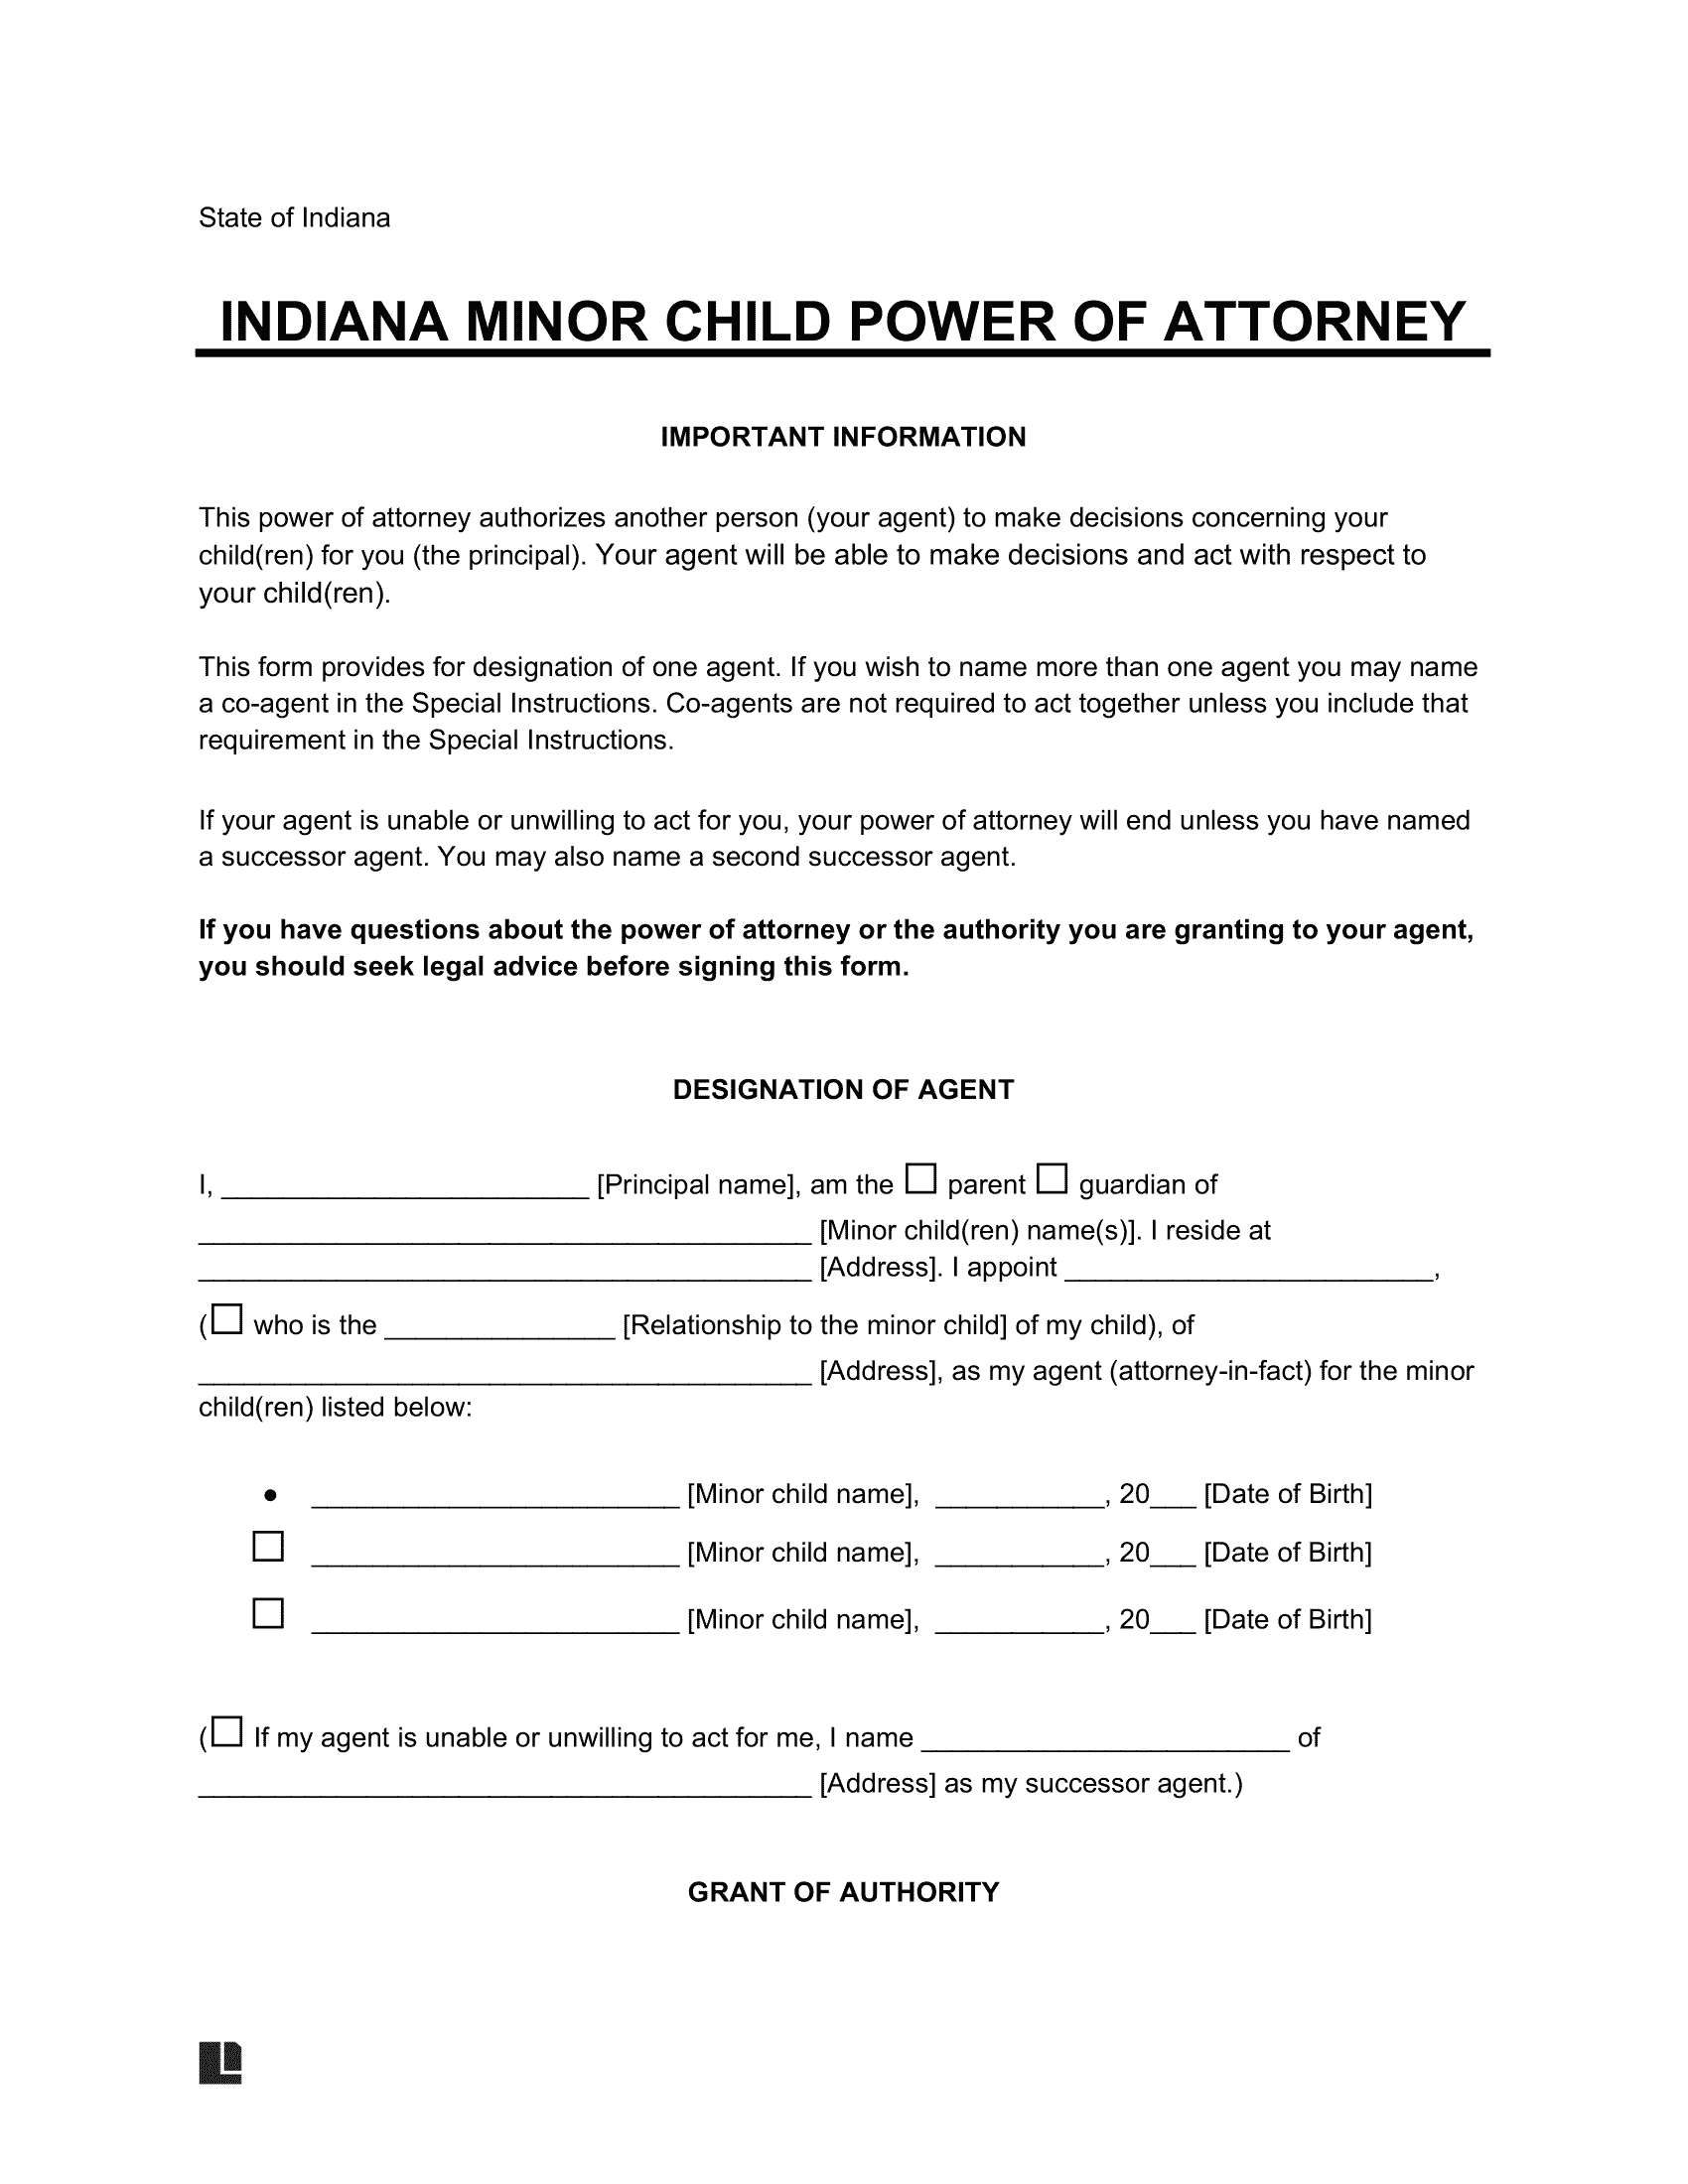 Indiana Minor Child Power of Attorney Form